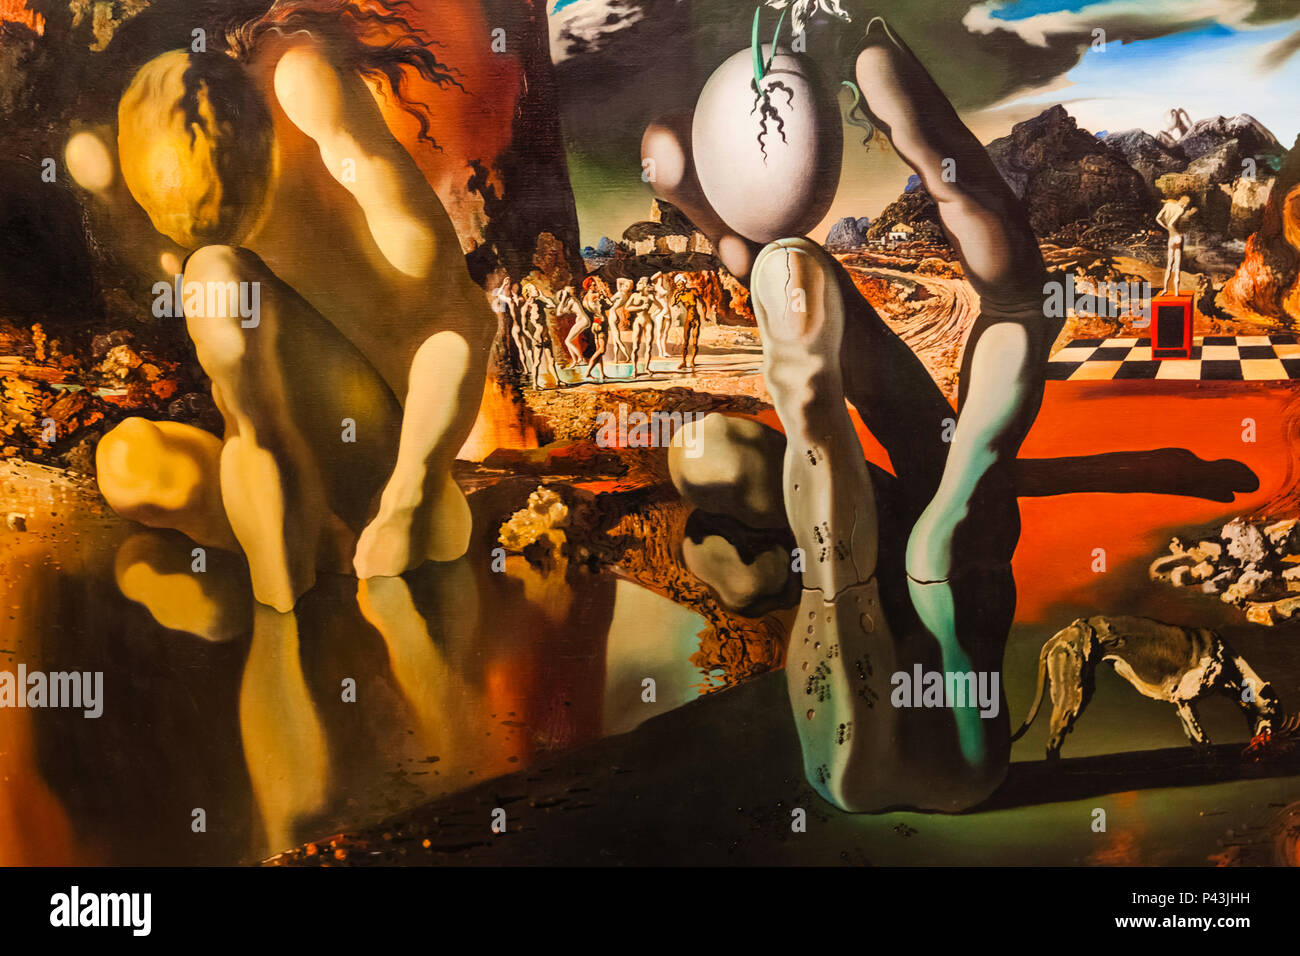 Painting titled 'Metamorphosis of Narcissus' by Salvador Dali dated 1937 Stock Photo